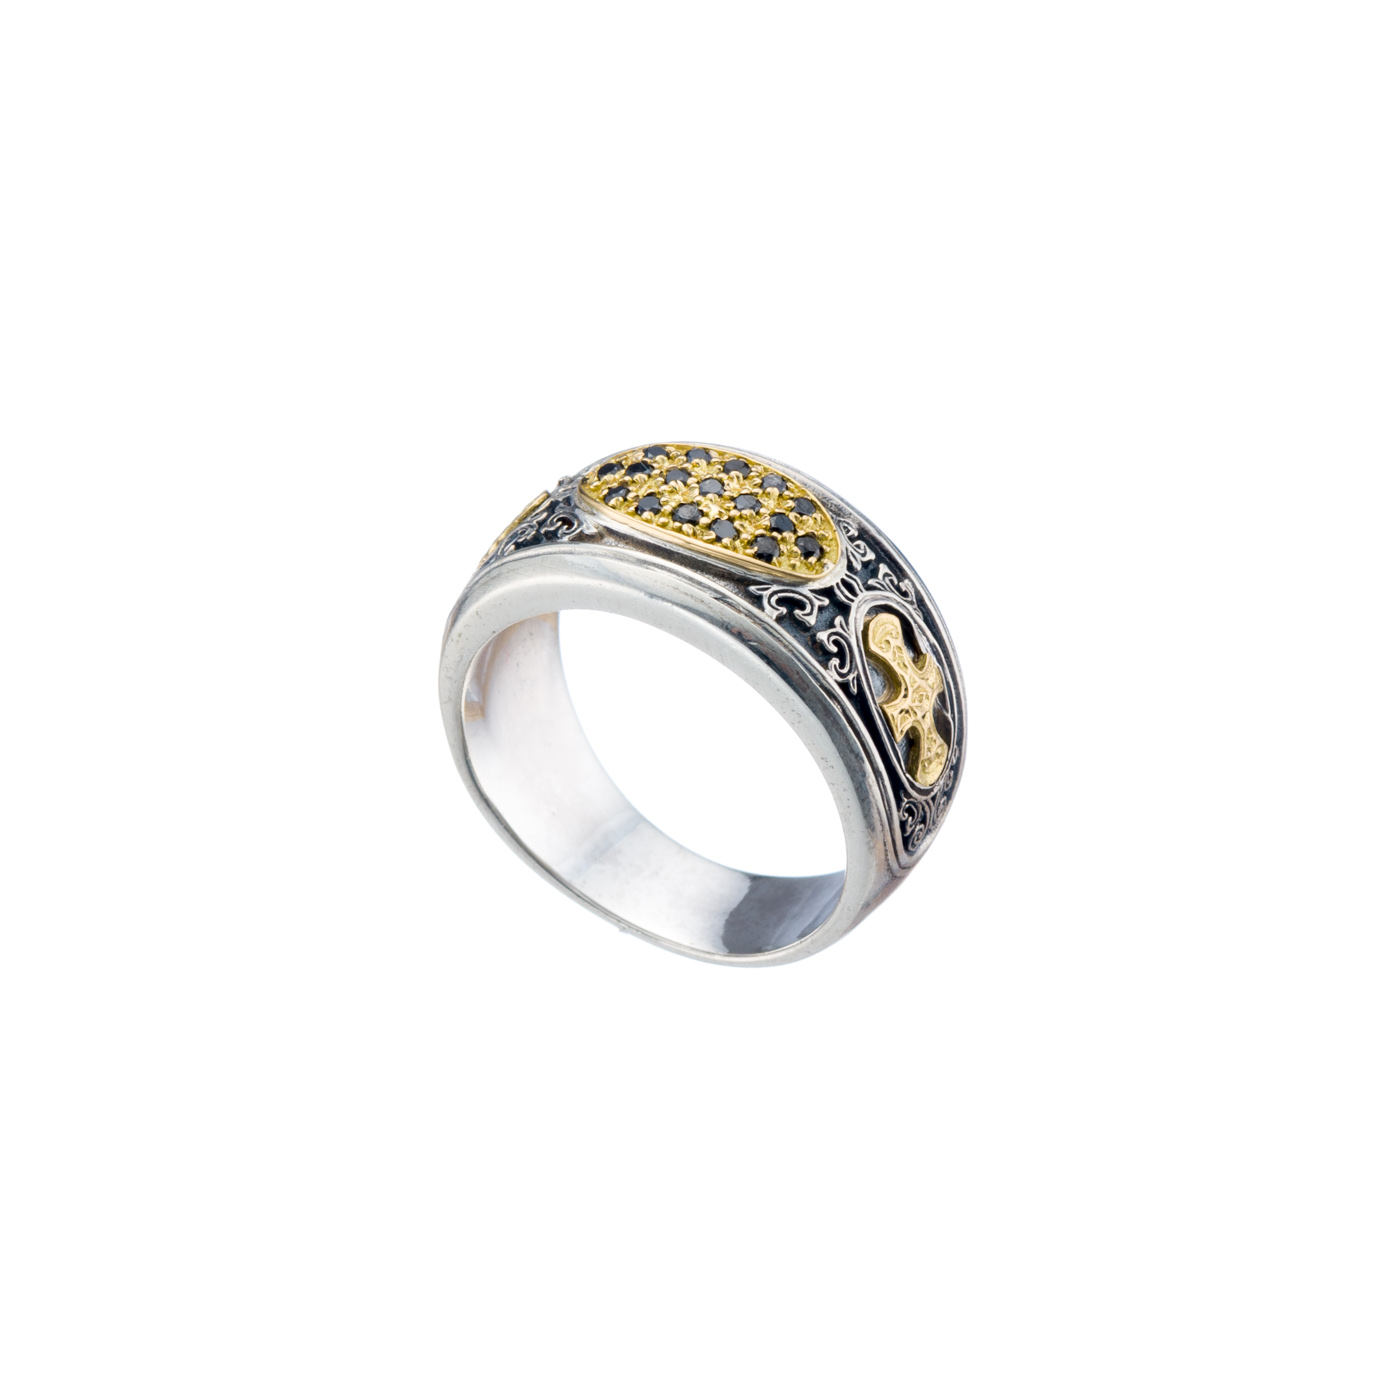 Patmos ring in 18K Gold and Sterling Silver with Black diamonds